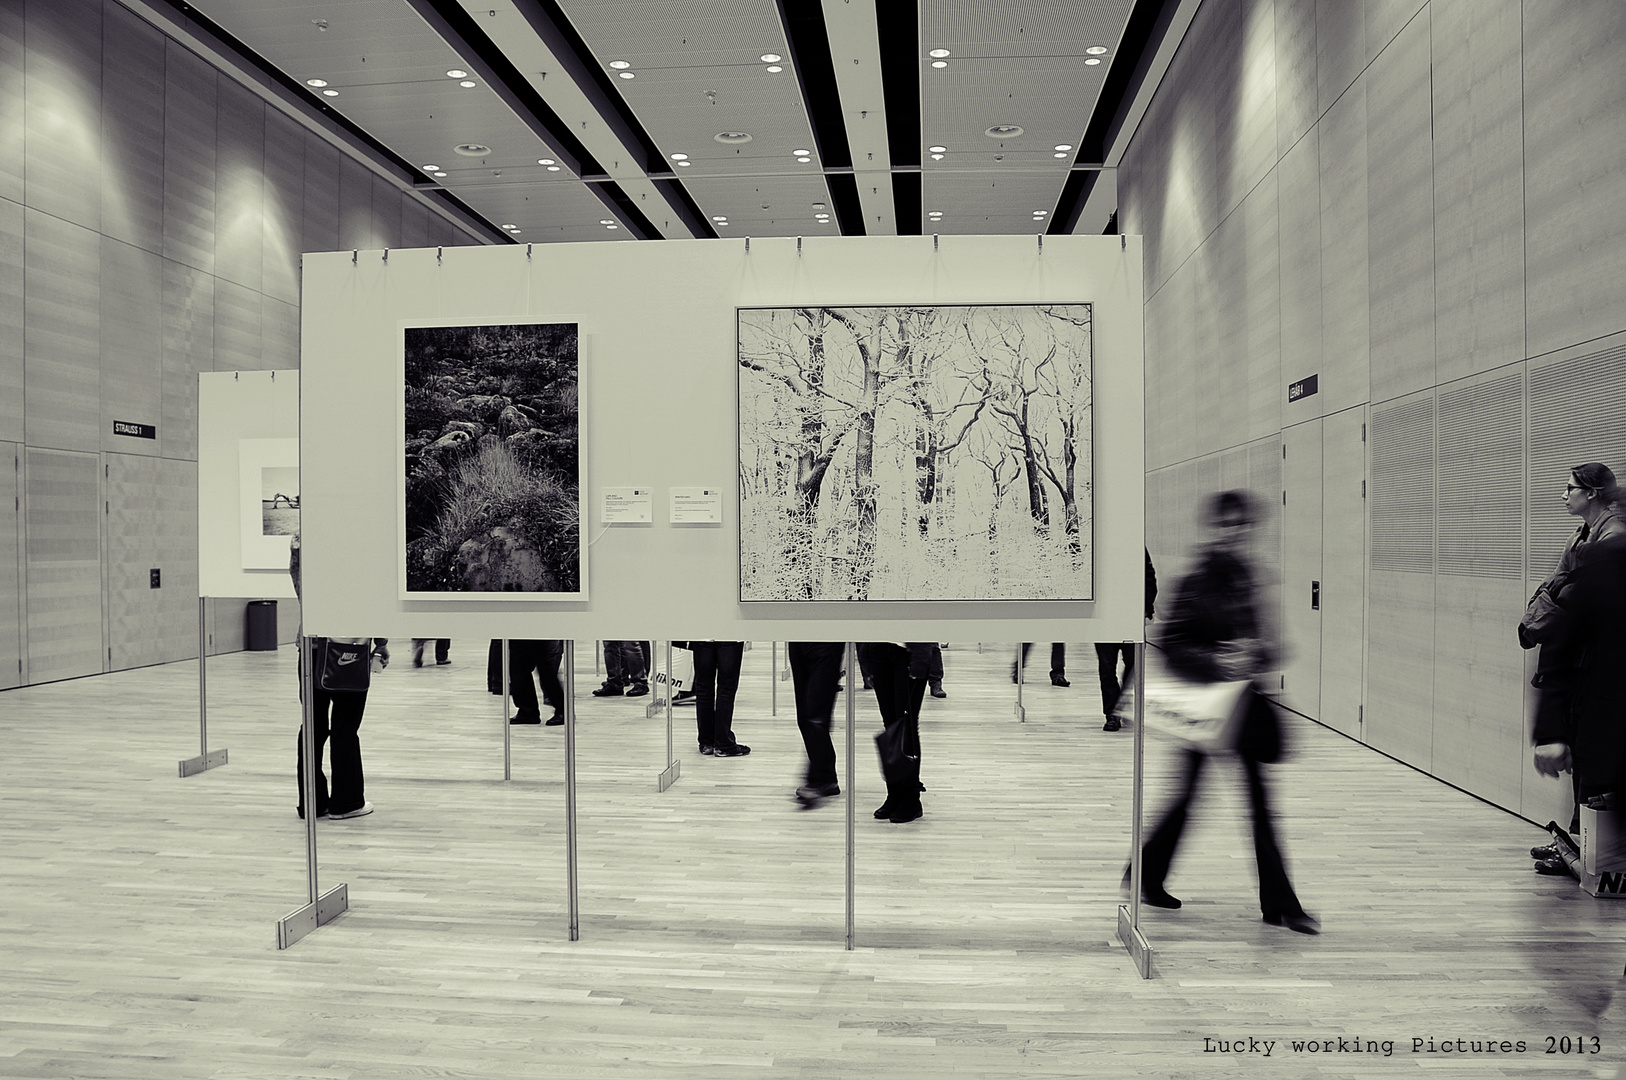 Fotomesse Wien - Pictures at an exhibition (04)